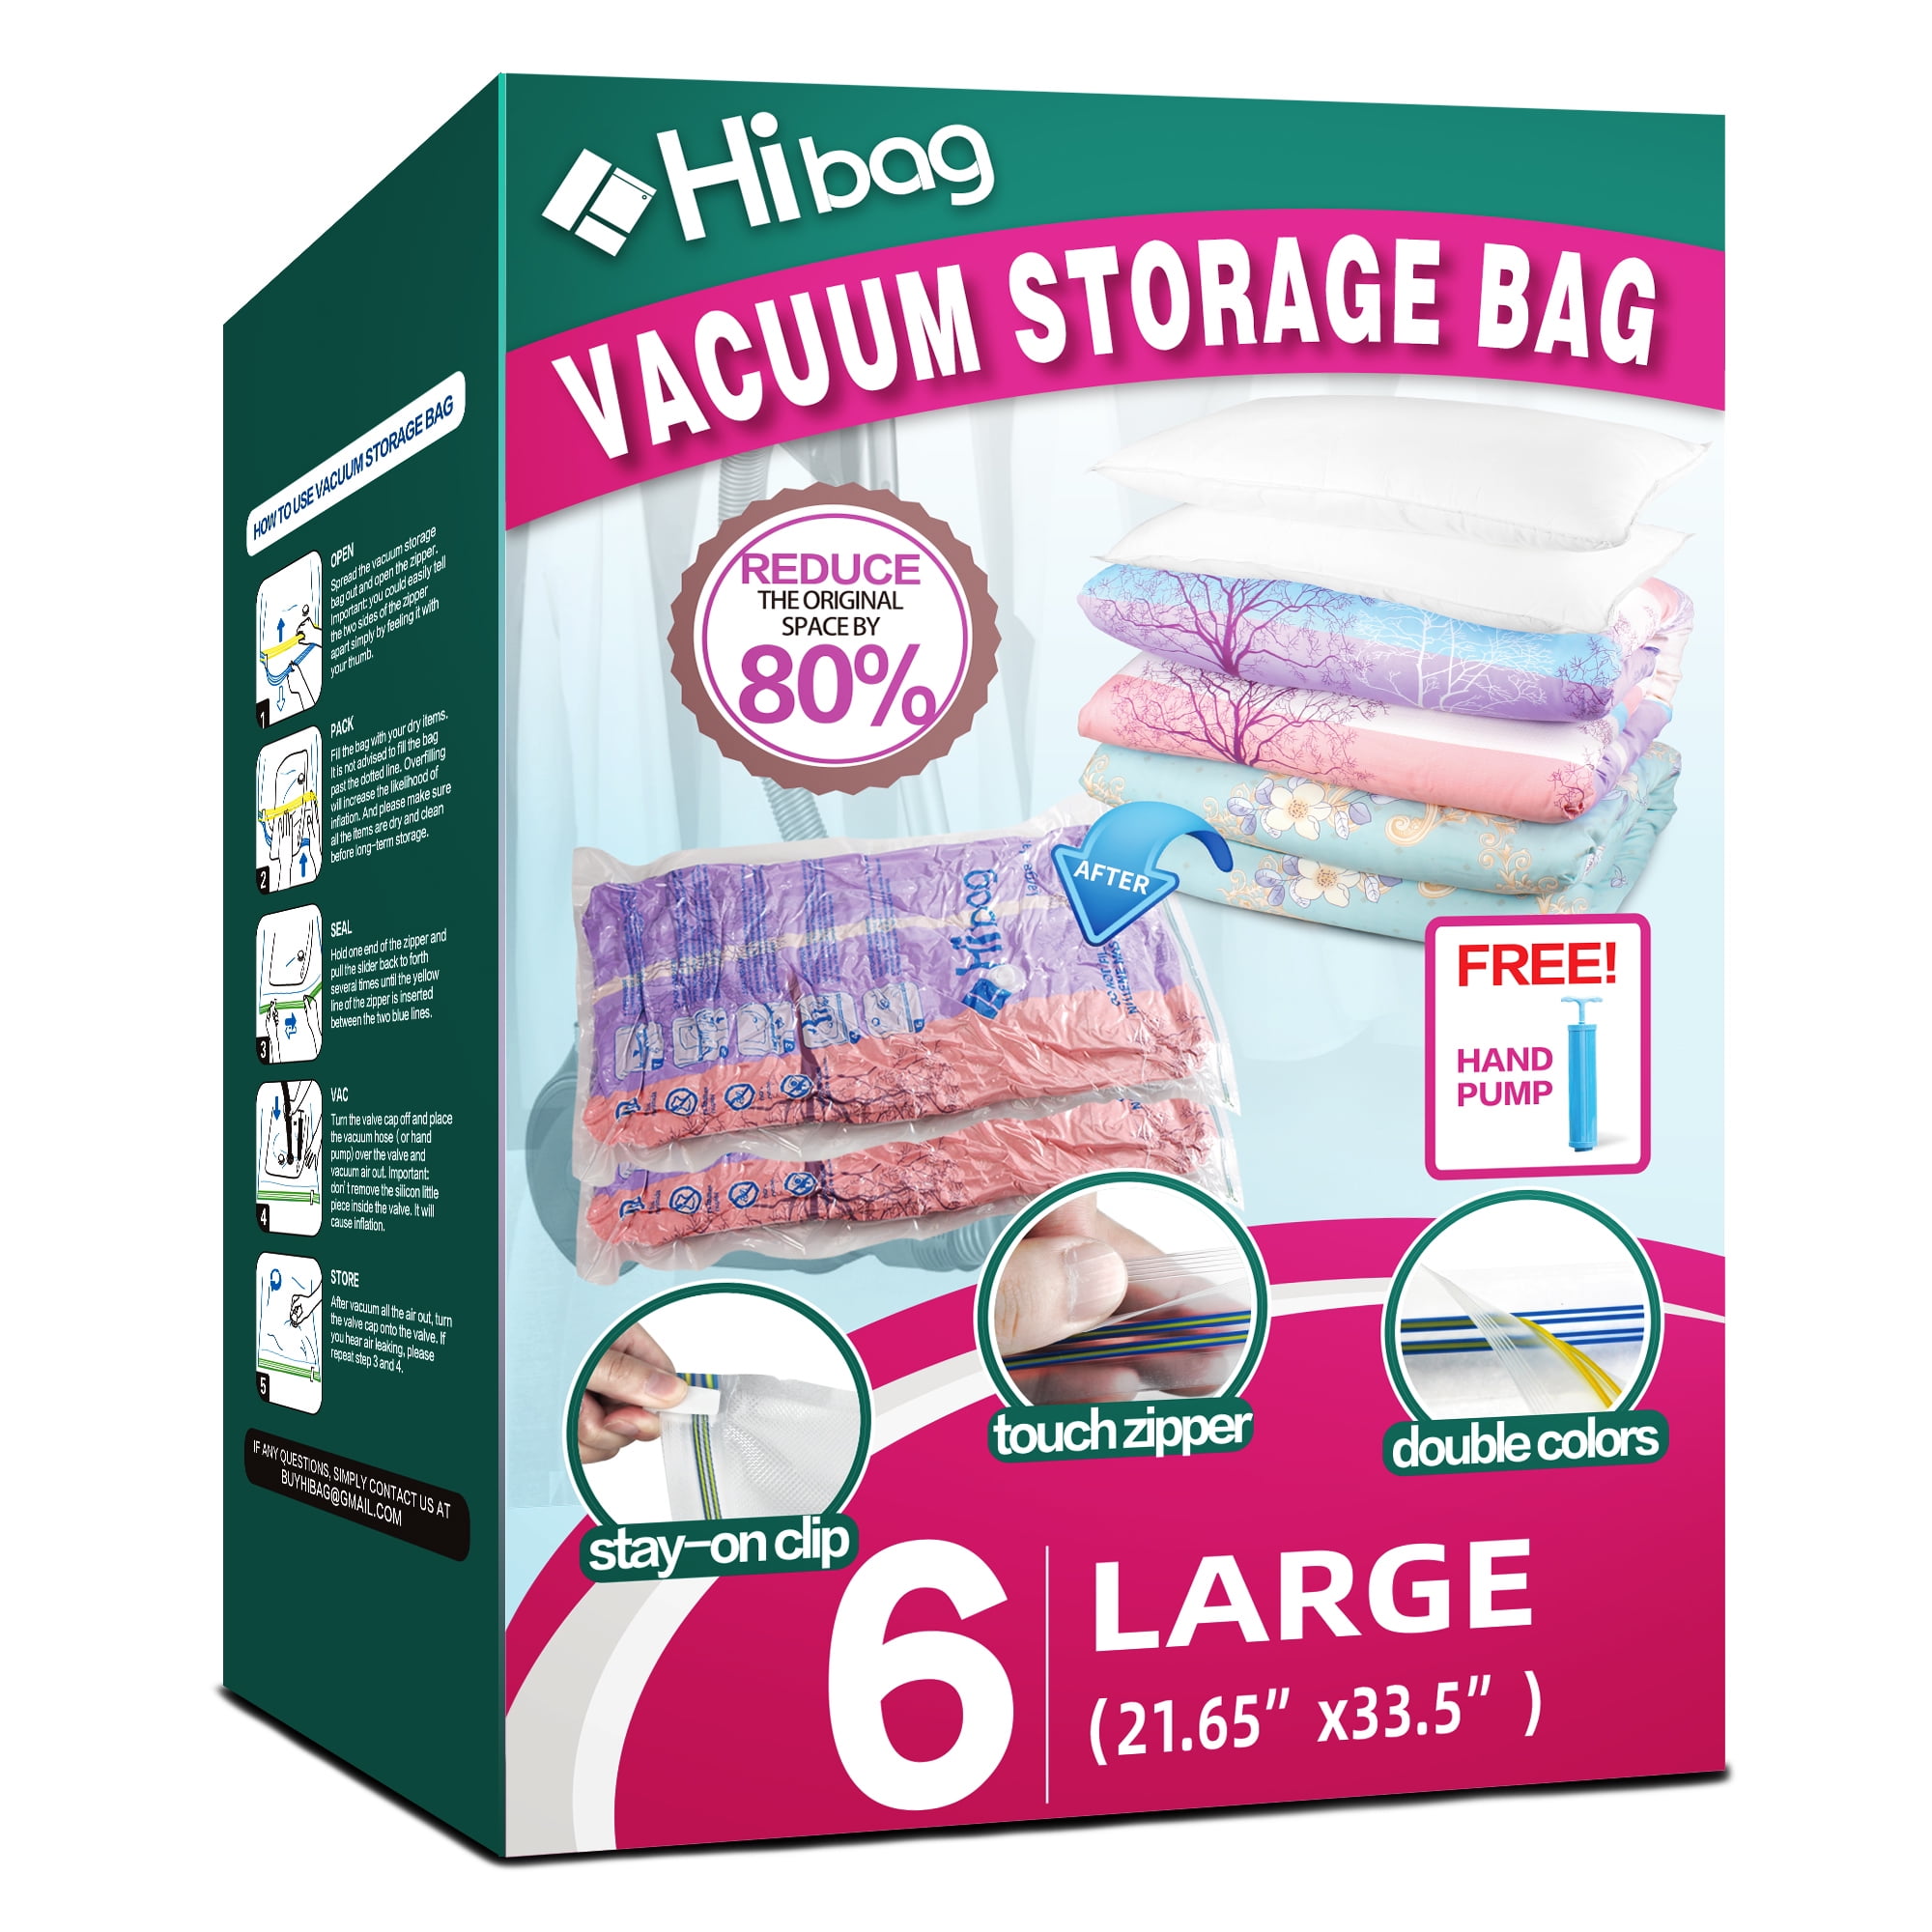 Project Source Large Shrink-Pak 3-Count Vacuum Seal Storage Bags in Clear | 7046LWSPDQ-463